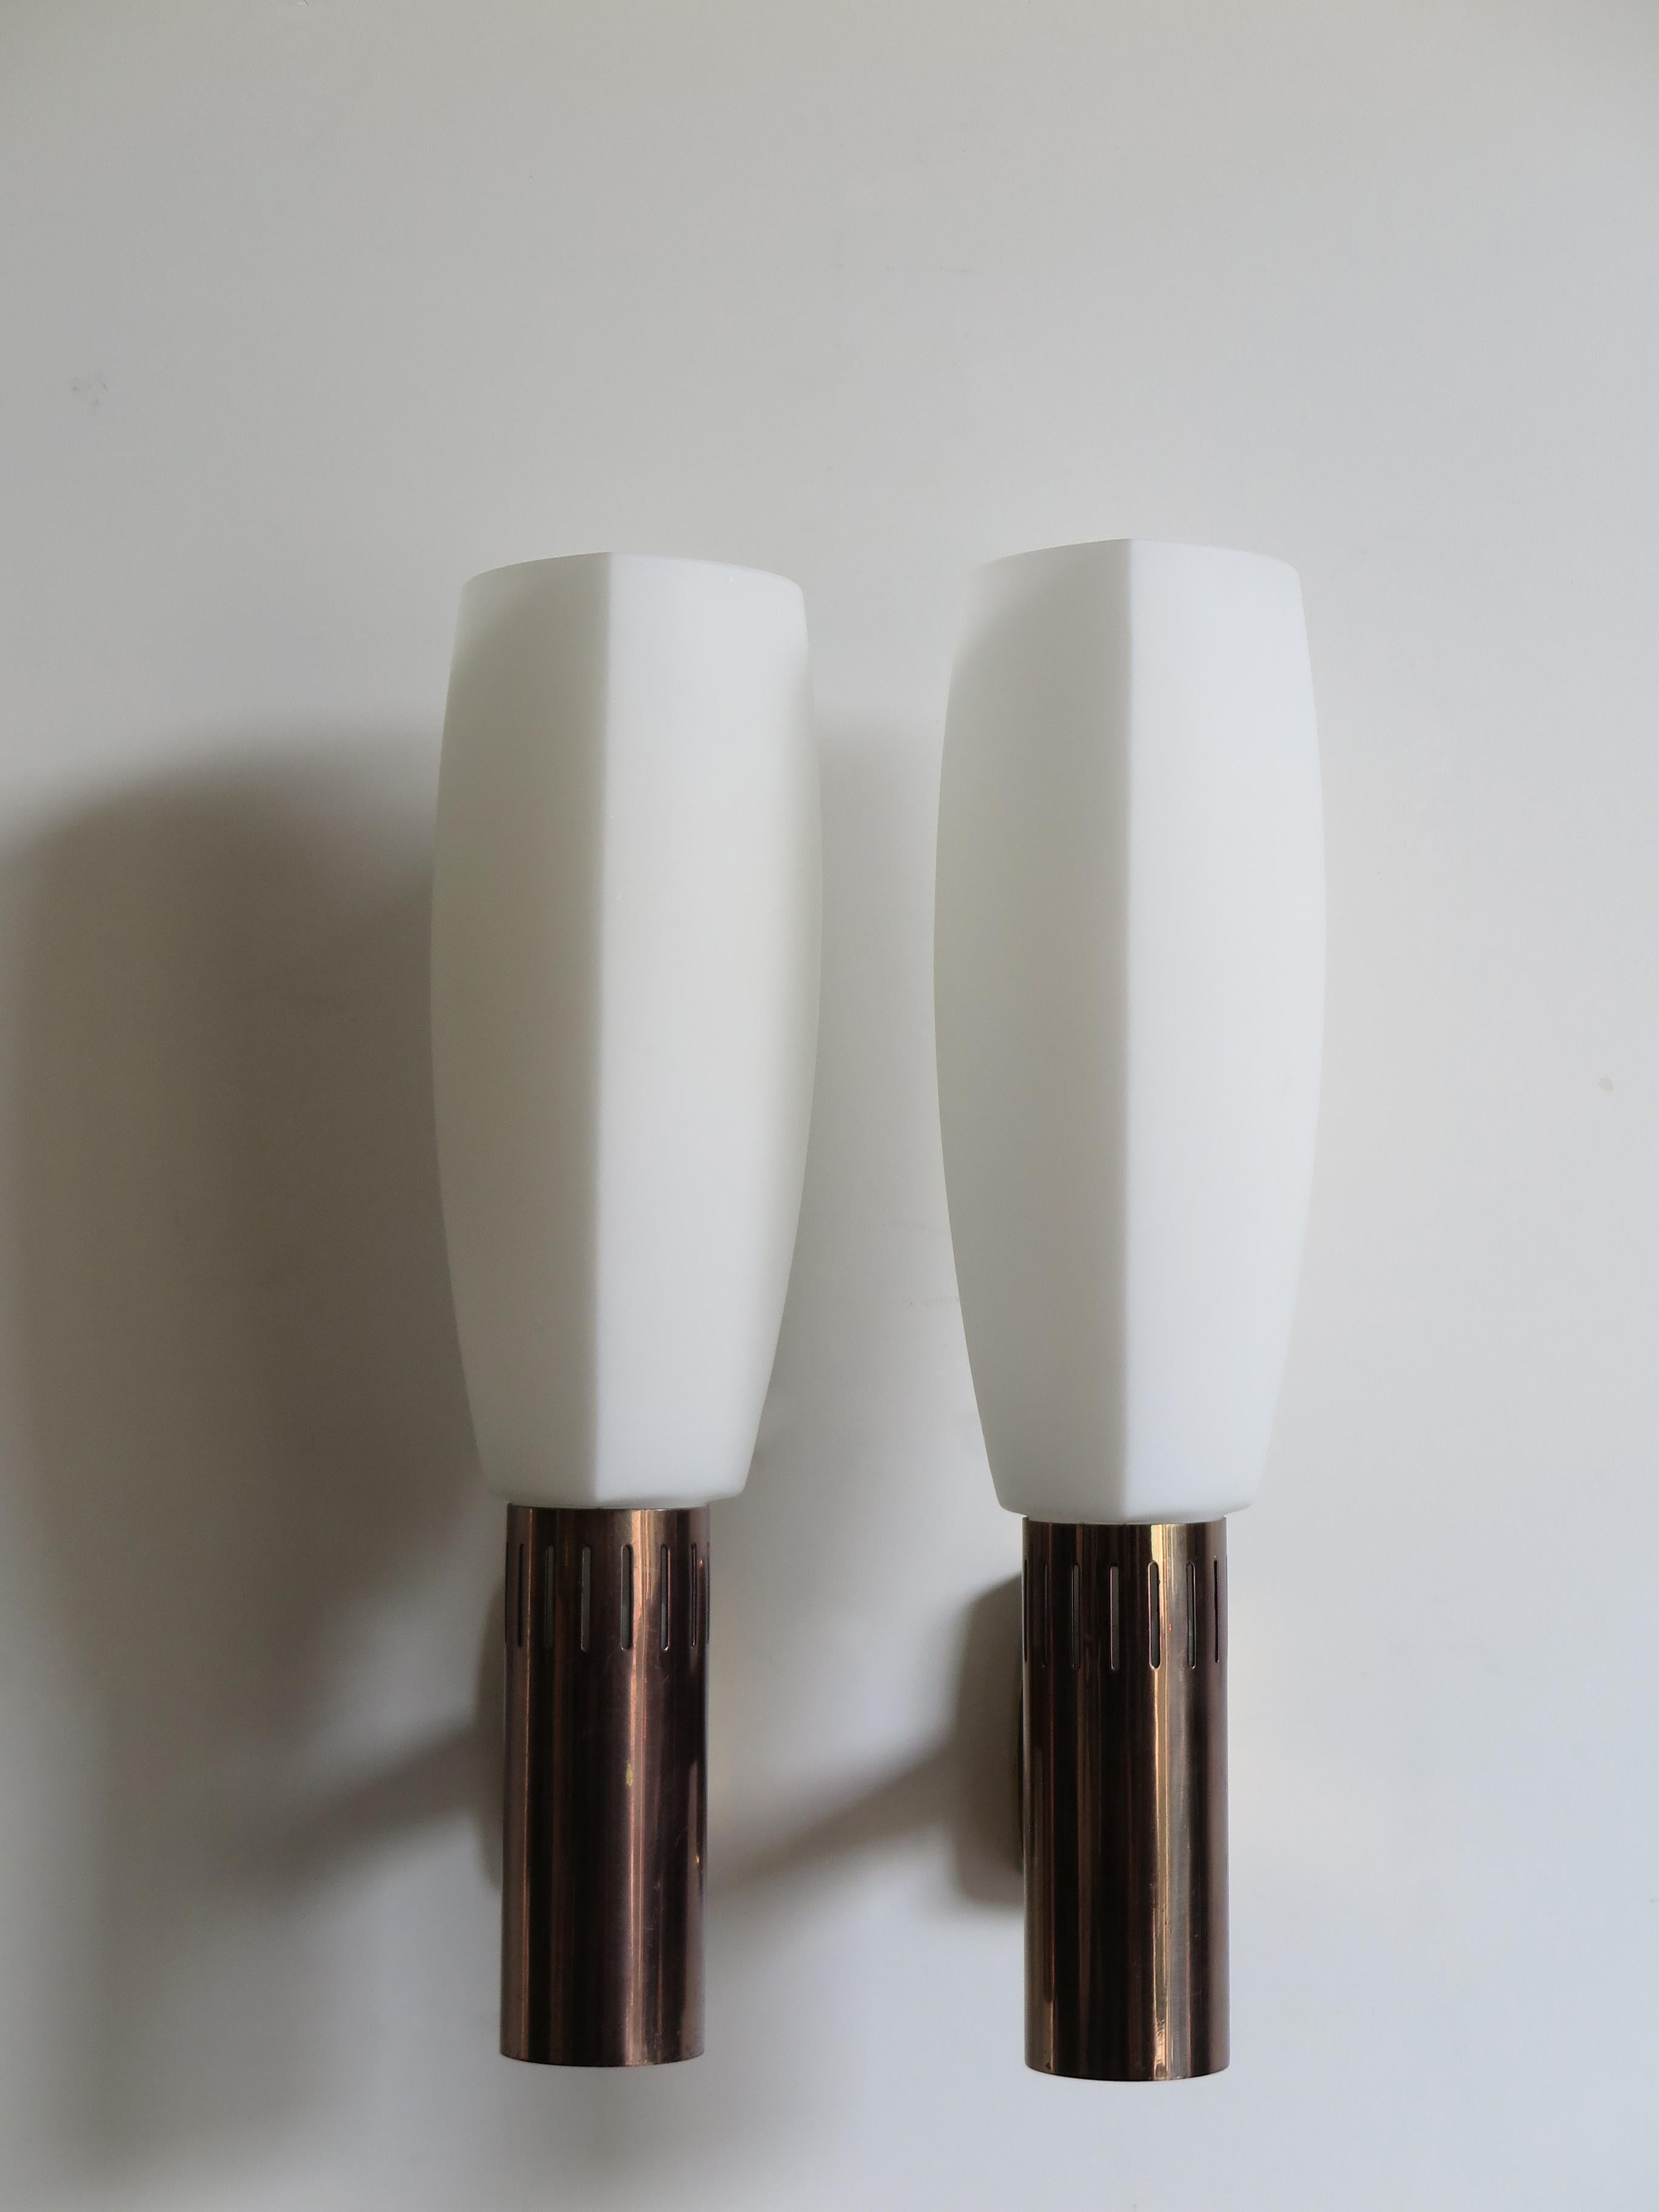 Couple of big Italian sconces / wall lamps produced by Stilnovo, 
with brass, burnished brass and frosted white opaline glass., circa1960s.
Engraved manufacturer’s mark and Stilnovo label, 1960s

Please note that the lamp is original of the